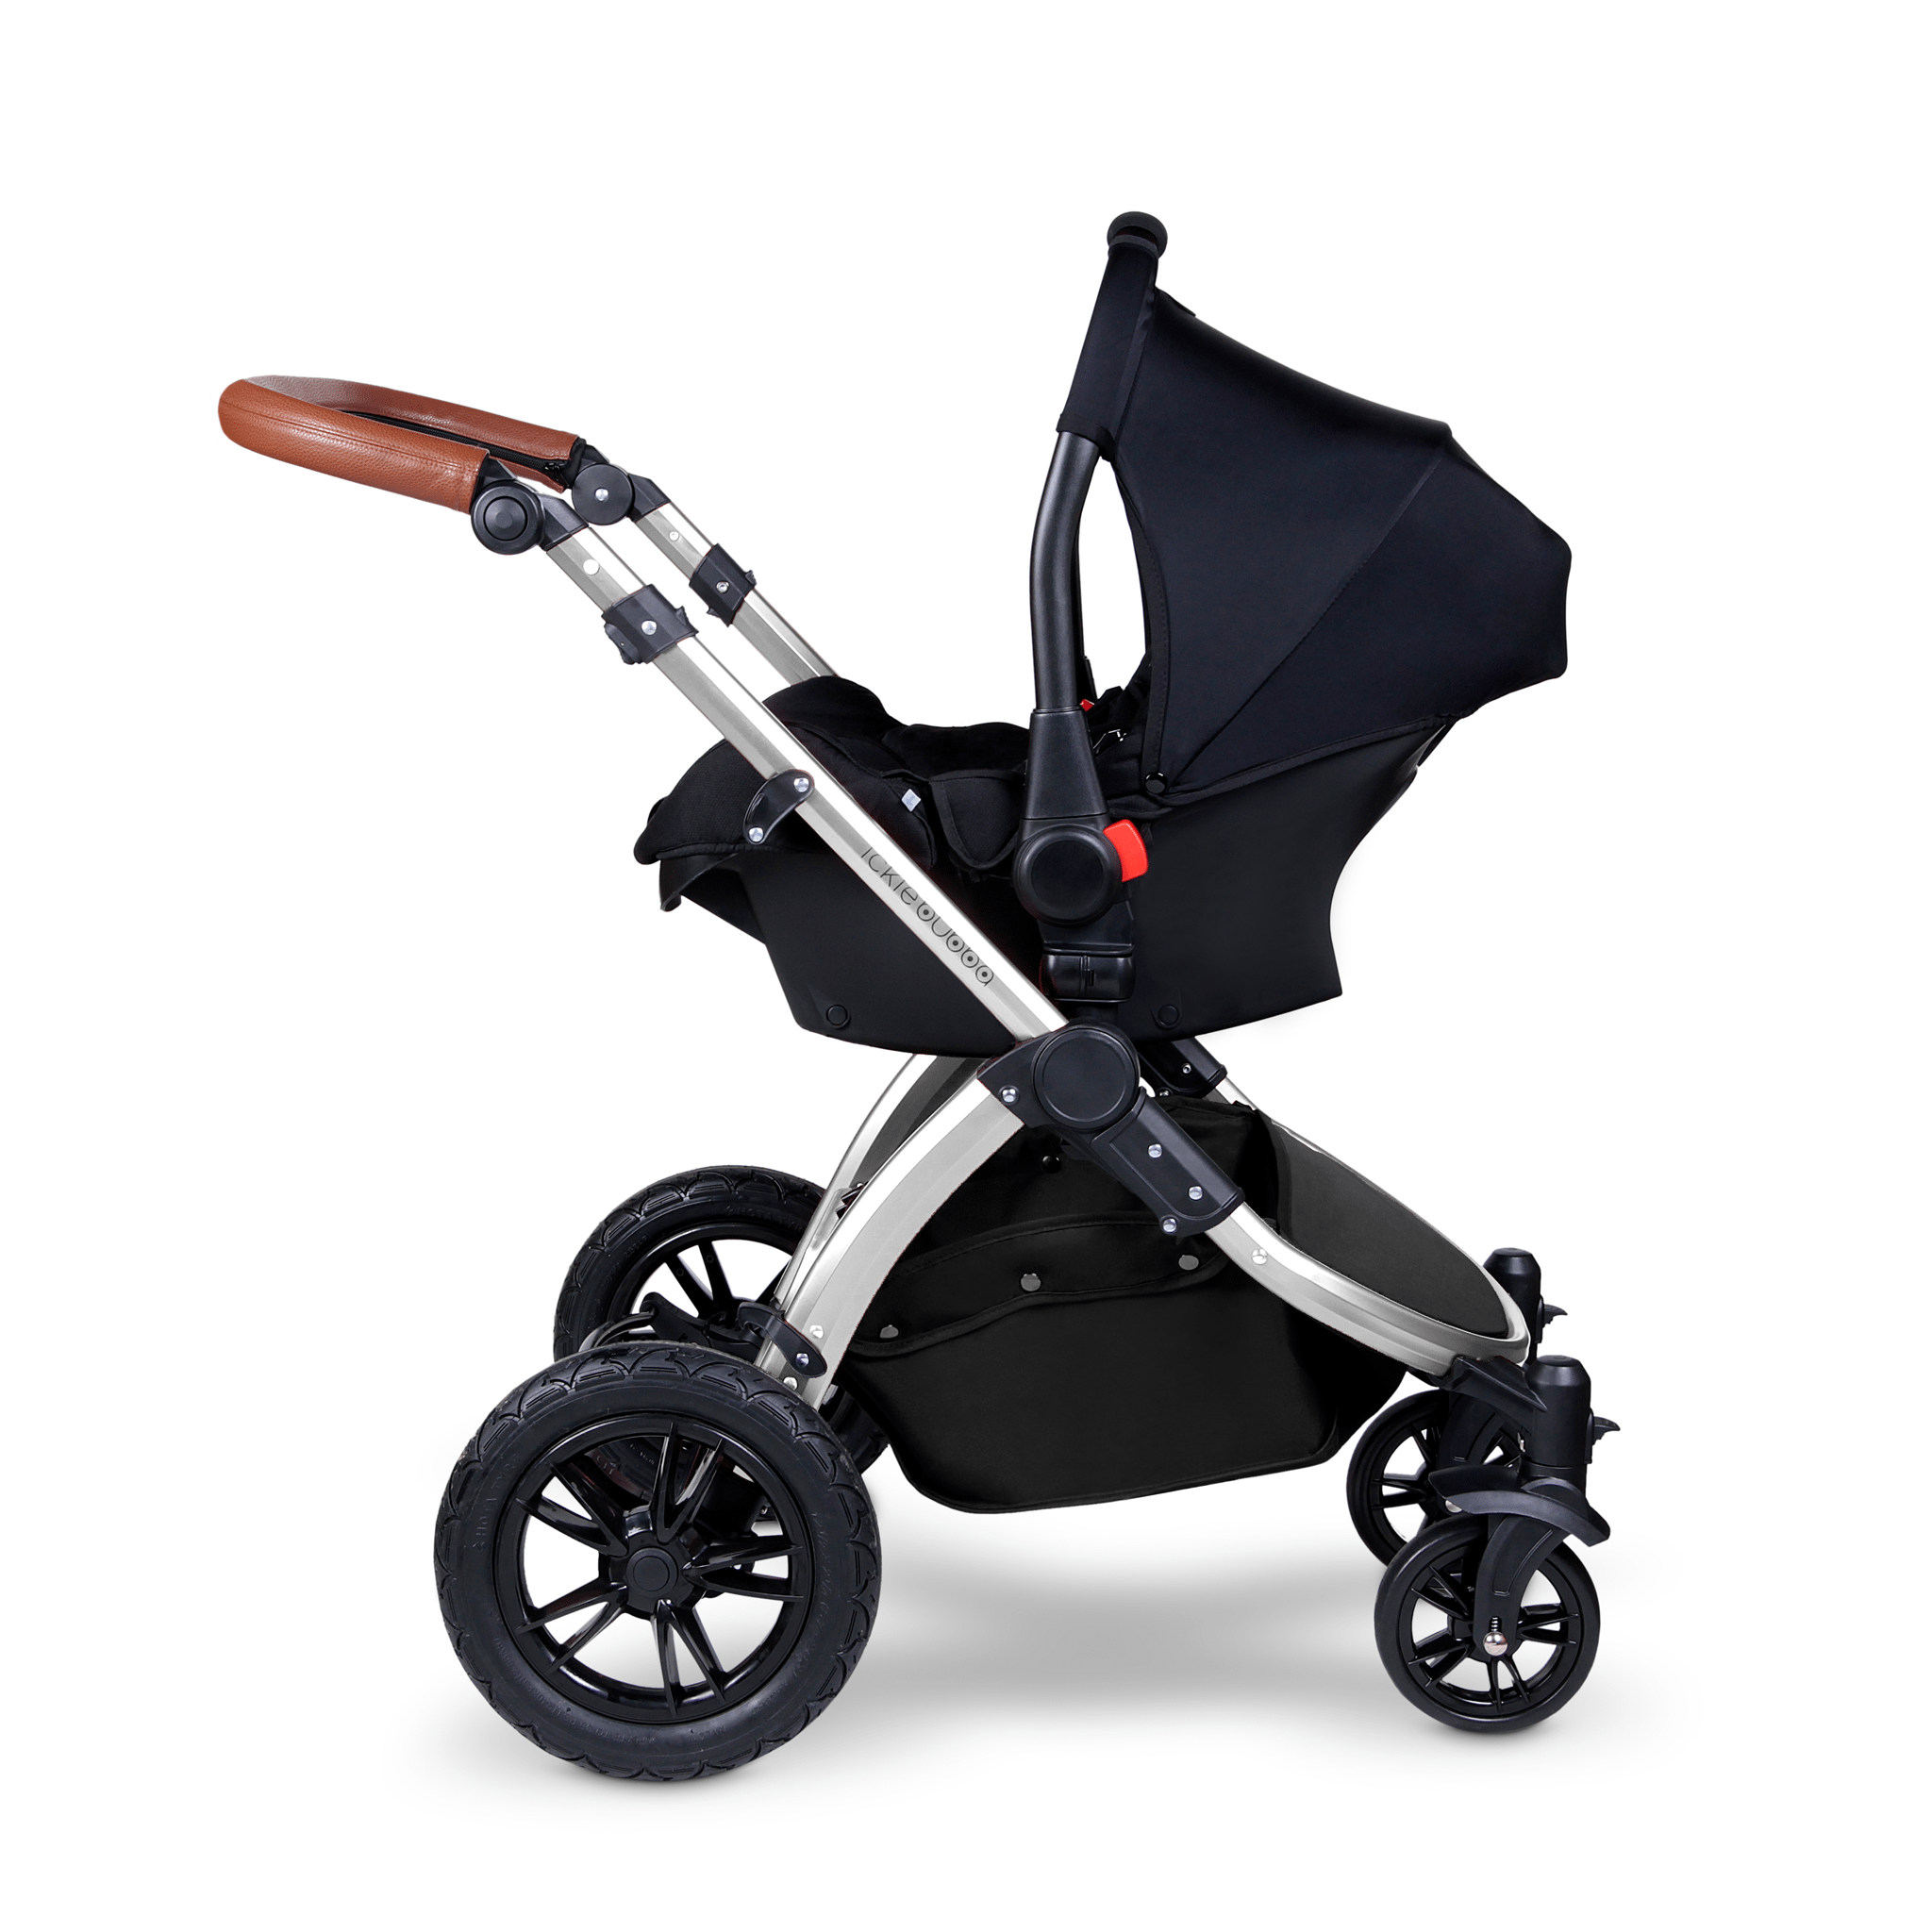 Ickle Bubba Stomp V4 Galaxy Travel System with ISOFIX Base Chrome/Midnight Pushchairs & Buggies 10-004-200-027 0709016518706